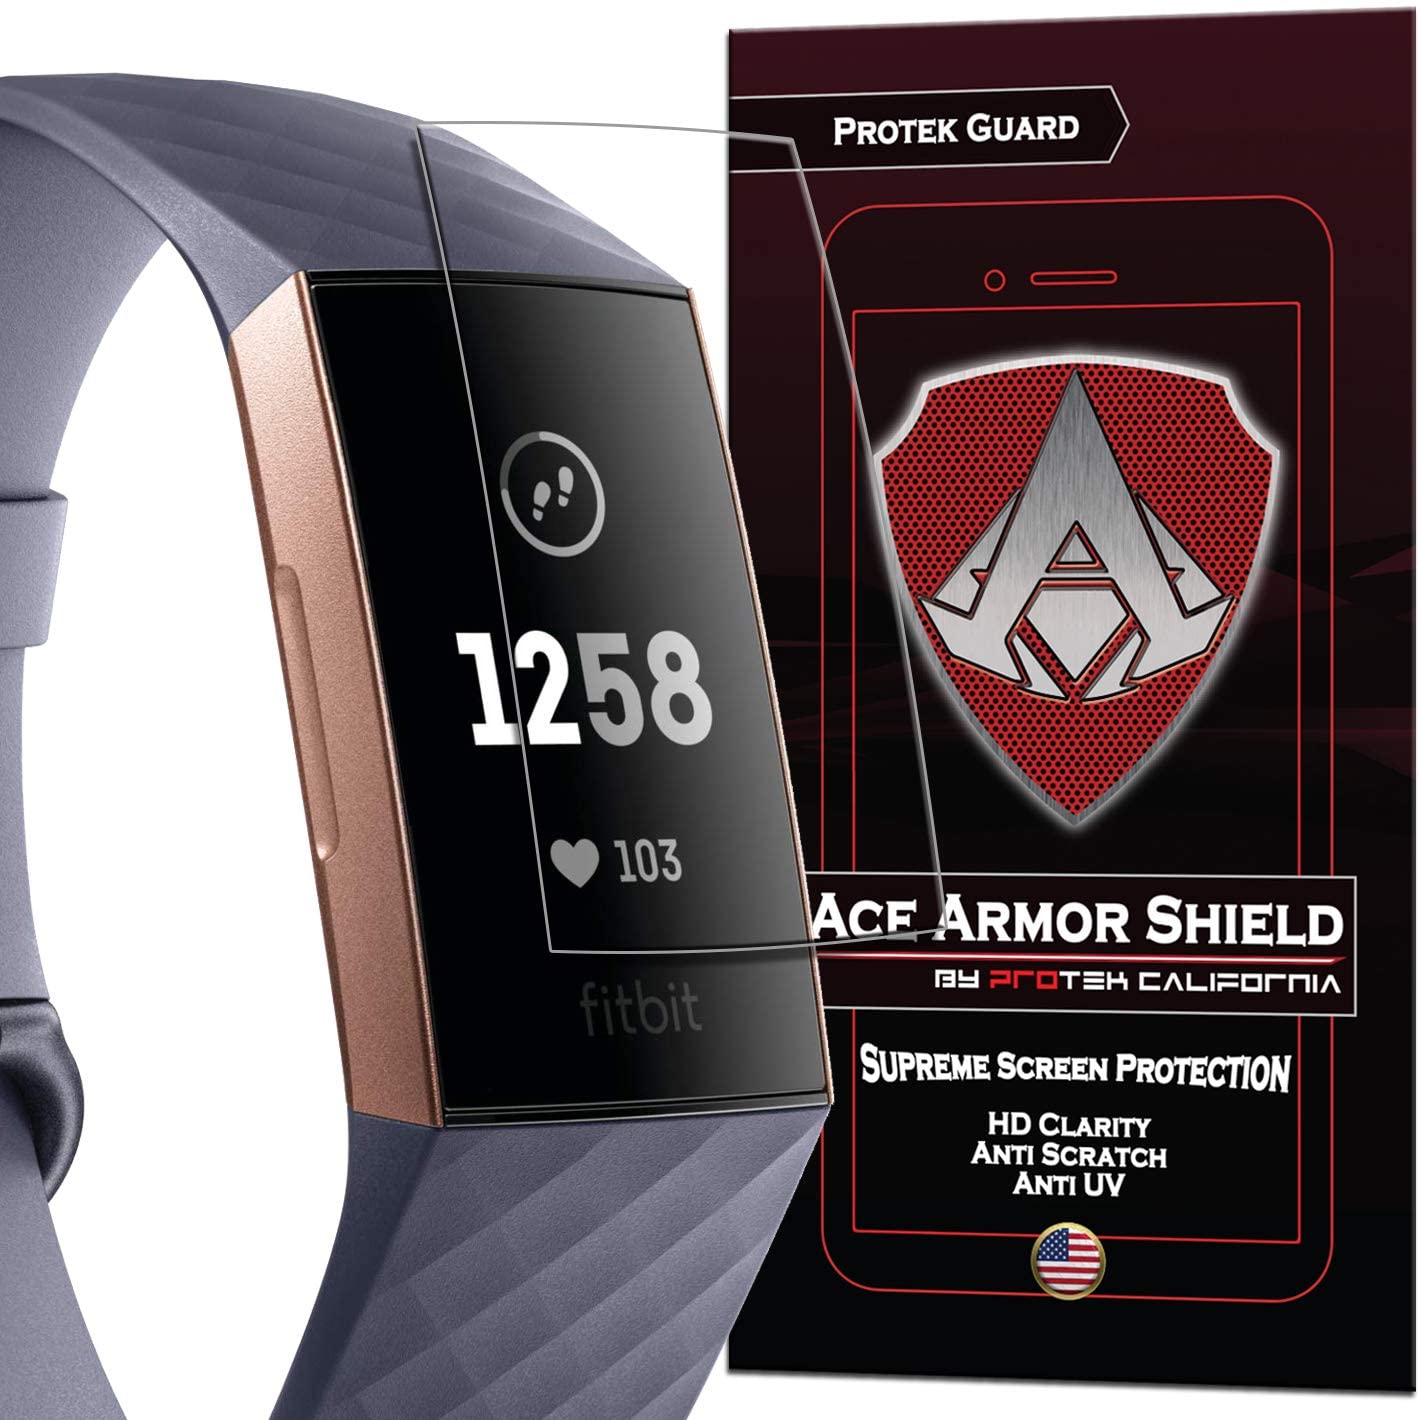 6 Pack Ace Armor Shield Protek Guard Screen Protector for The Fitbit Charge 2 